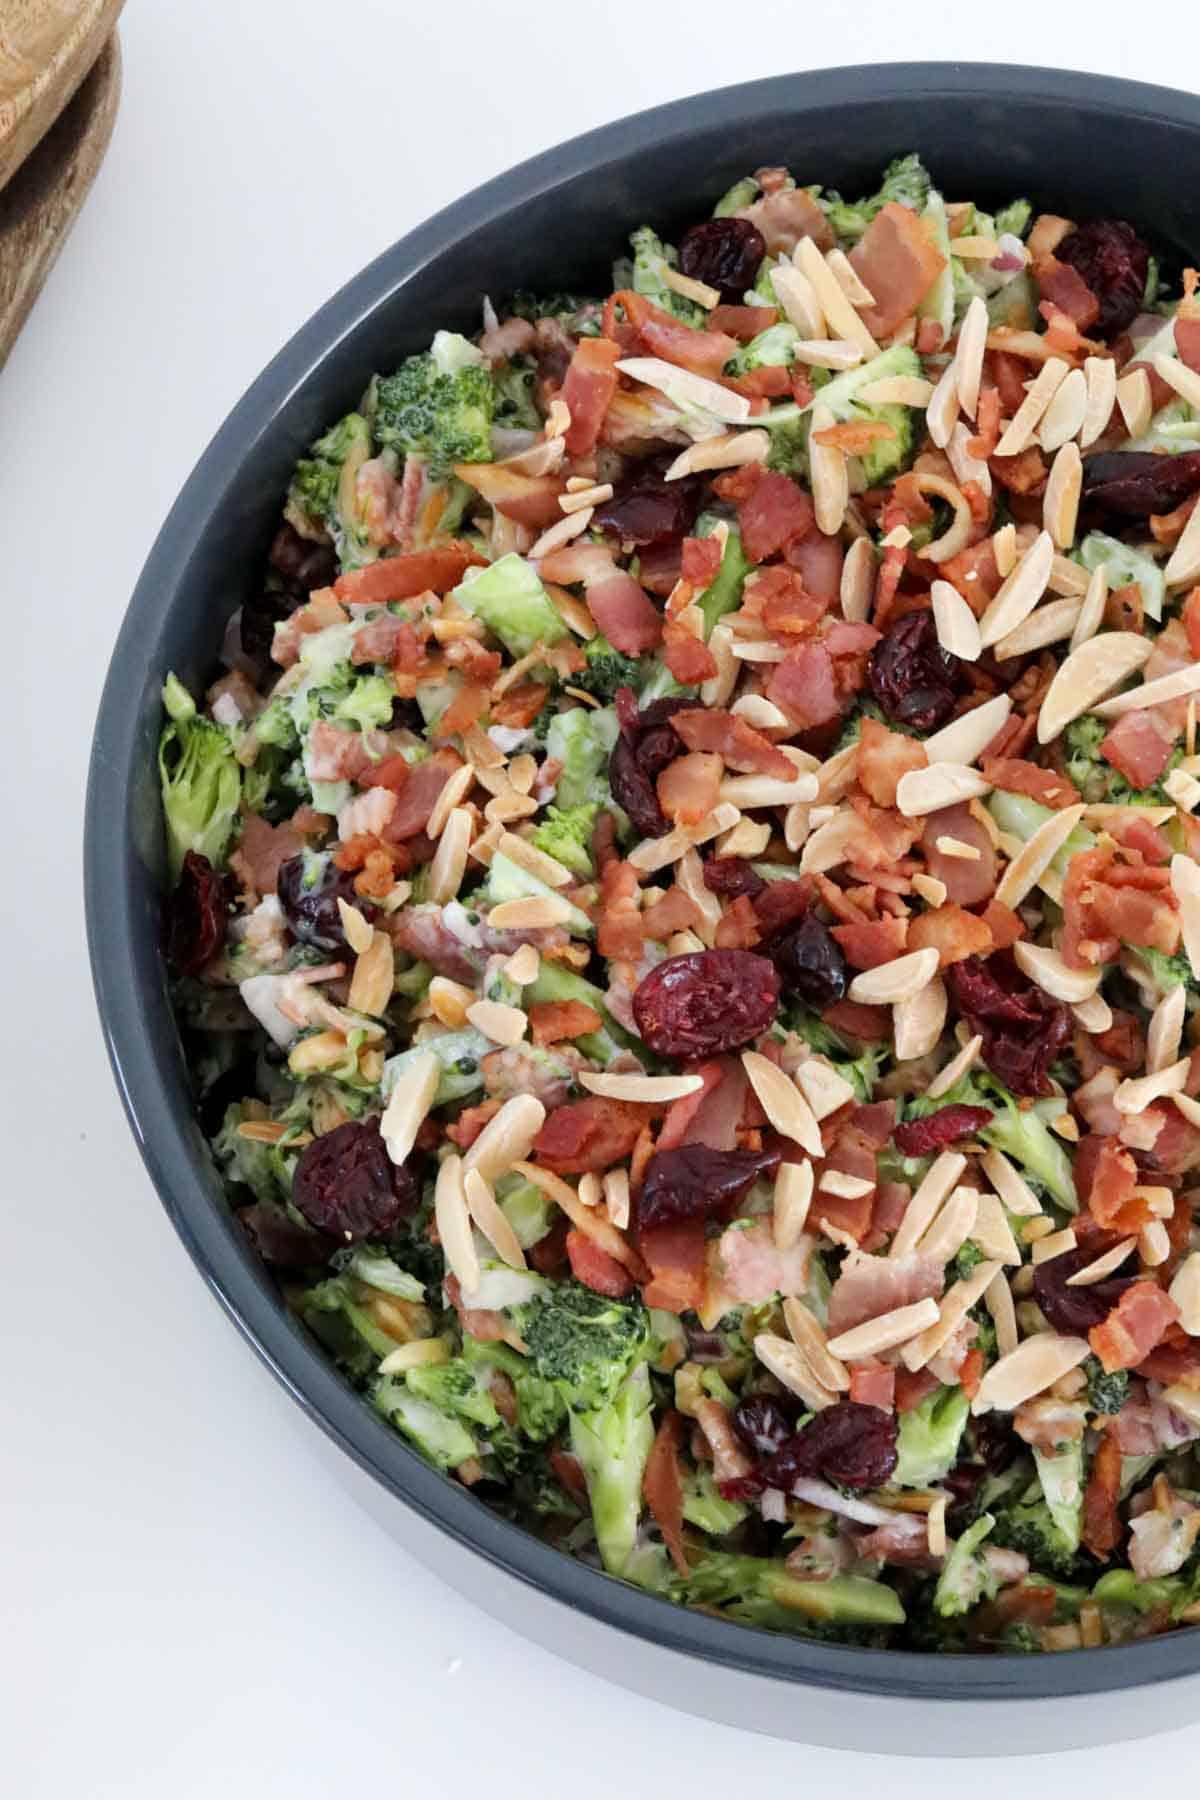 Toasted slivered almonds and dried cranberries scattered through a healthy salad.